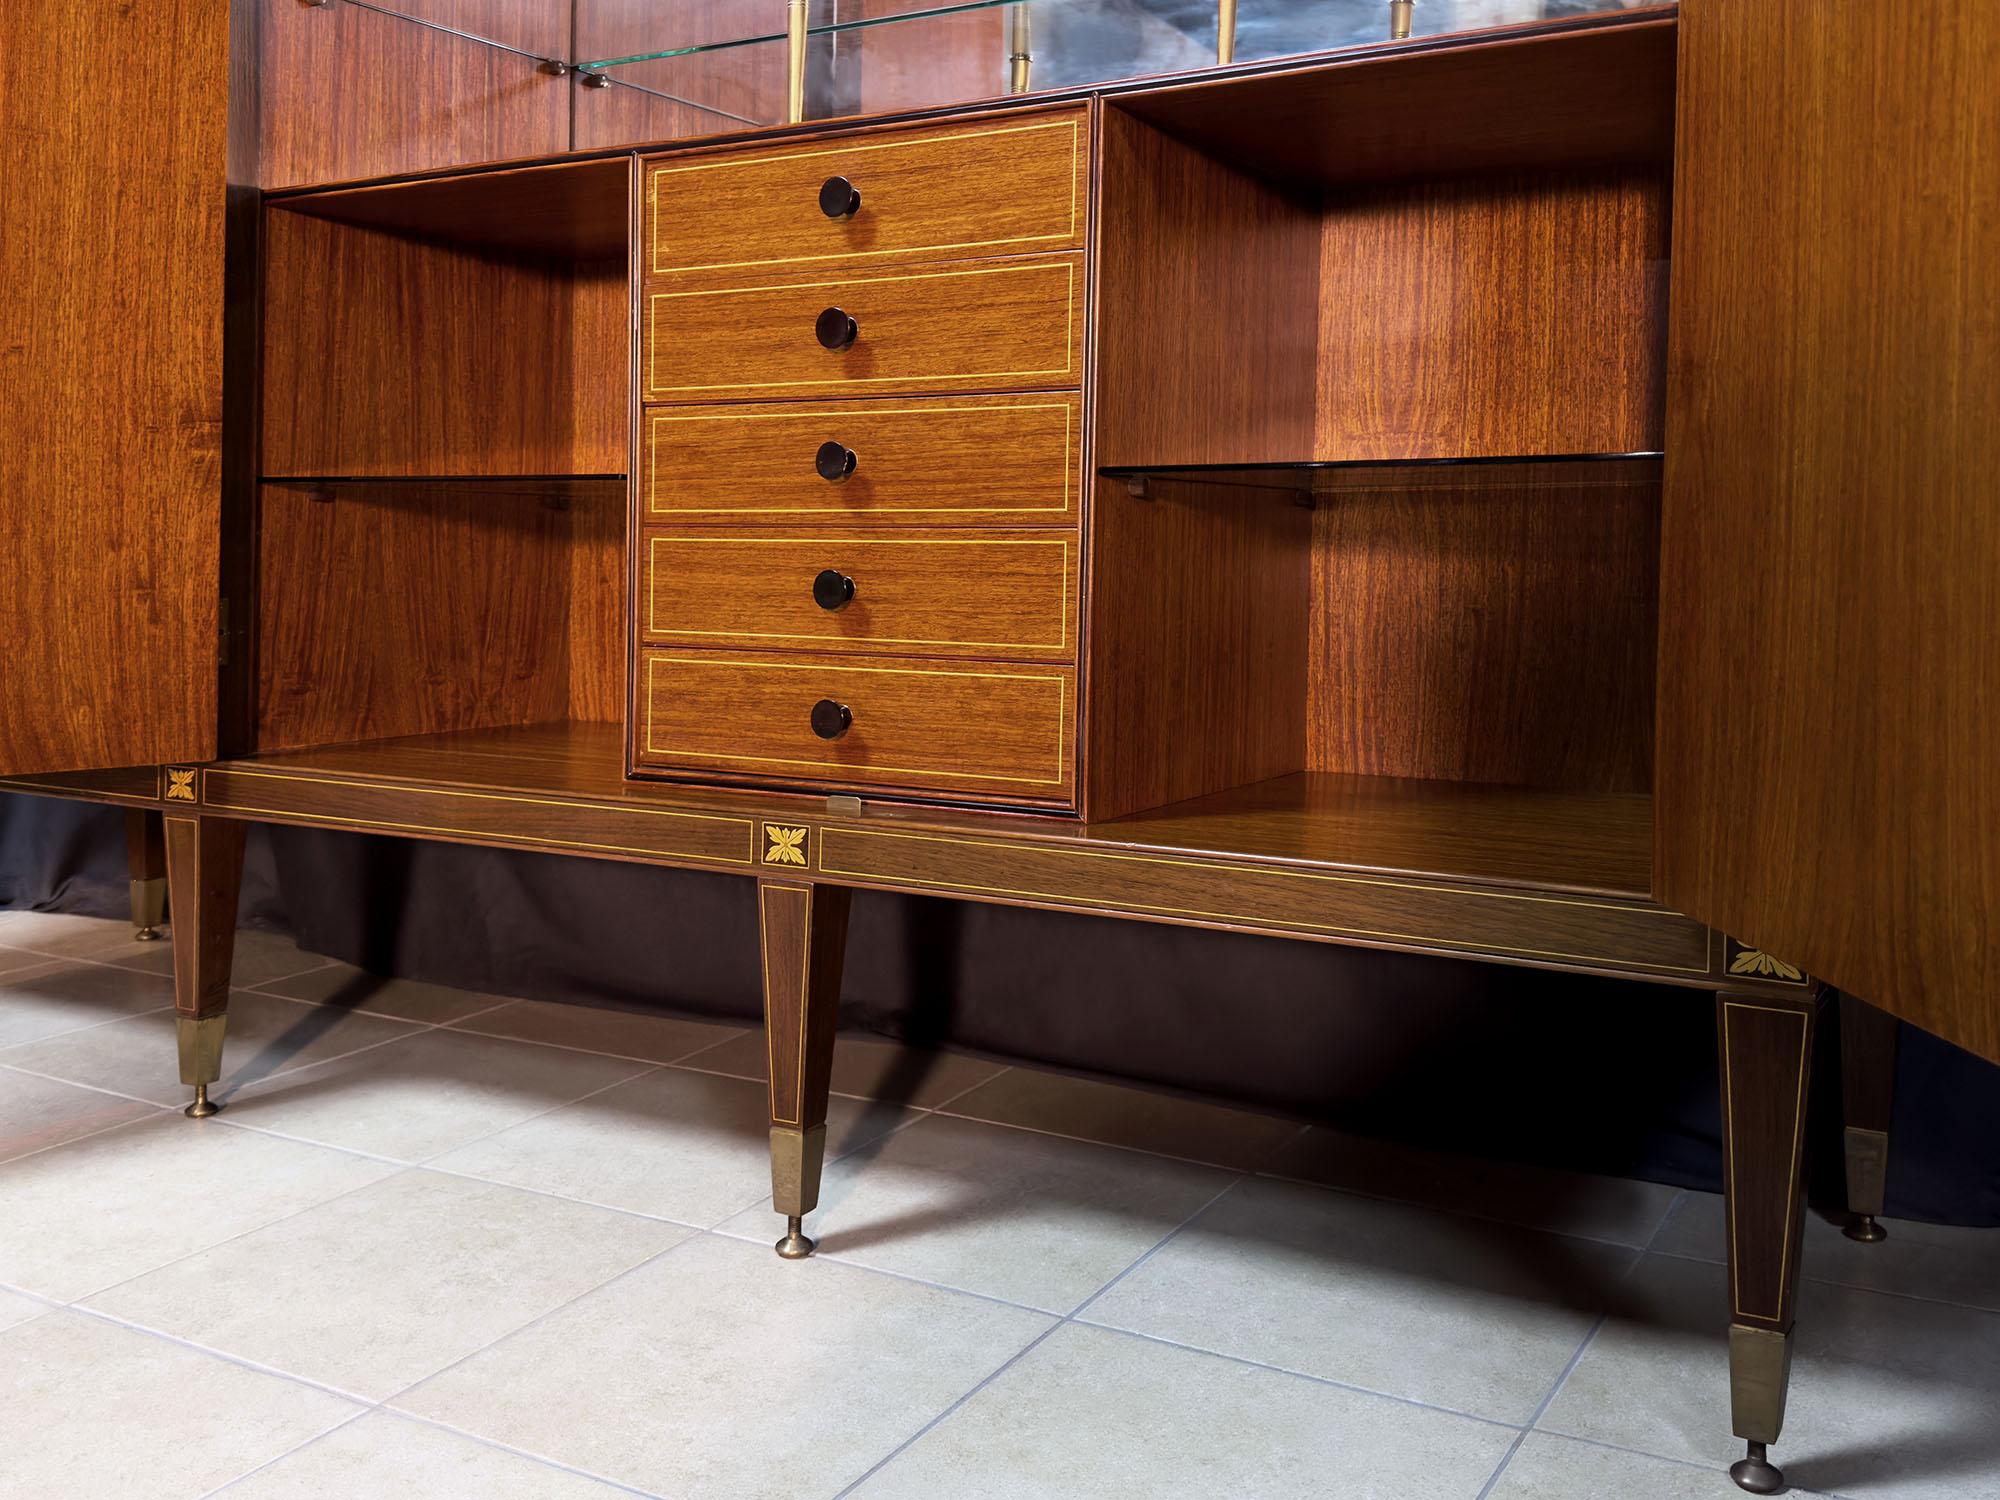 Italian Mid-Century Sideboard with Inlays by Anzani for Marelli & Colico, 1950s For Sale 9